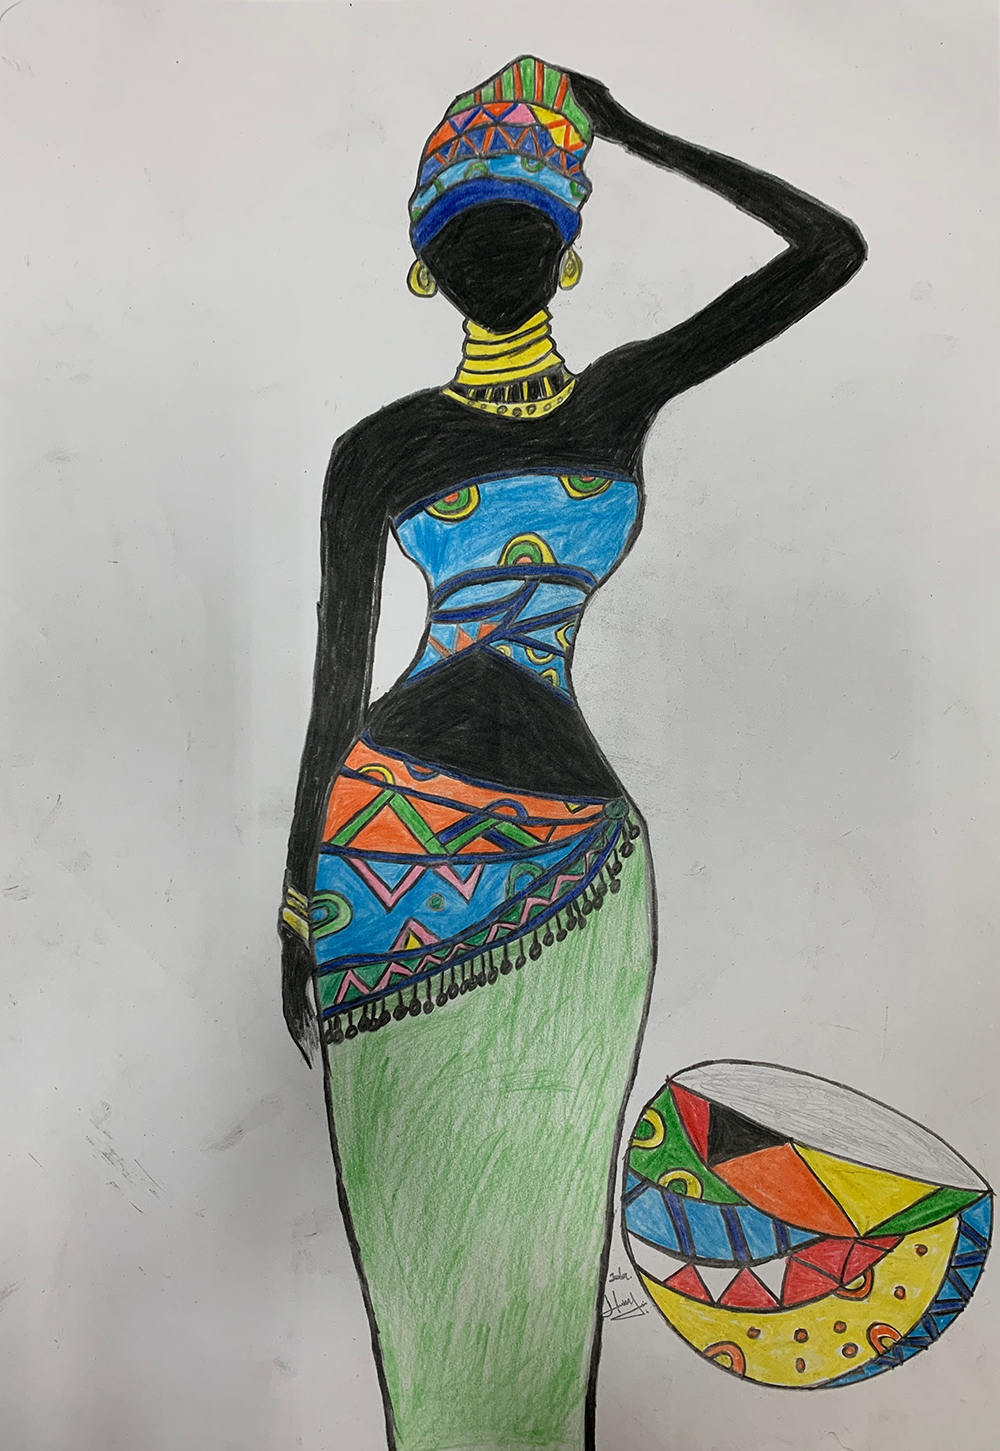 'Heritage' by Edjamtoli Mazama Erso from Togo (Second Prize). This portrait of an African woman uses crayons and pencils to show the texture and details of her characteristic dress and colorful accessories, conveying the message that traditional fashion never goes out of style. /Photo provided to CGTN